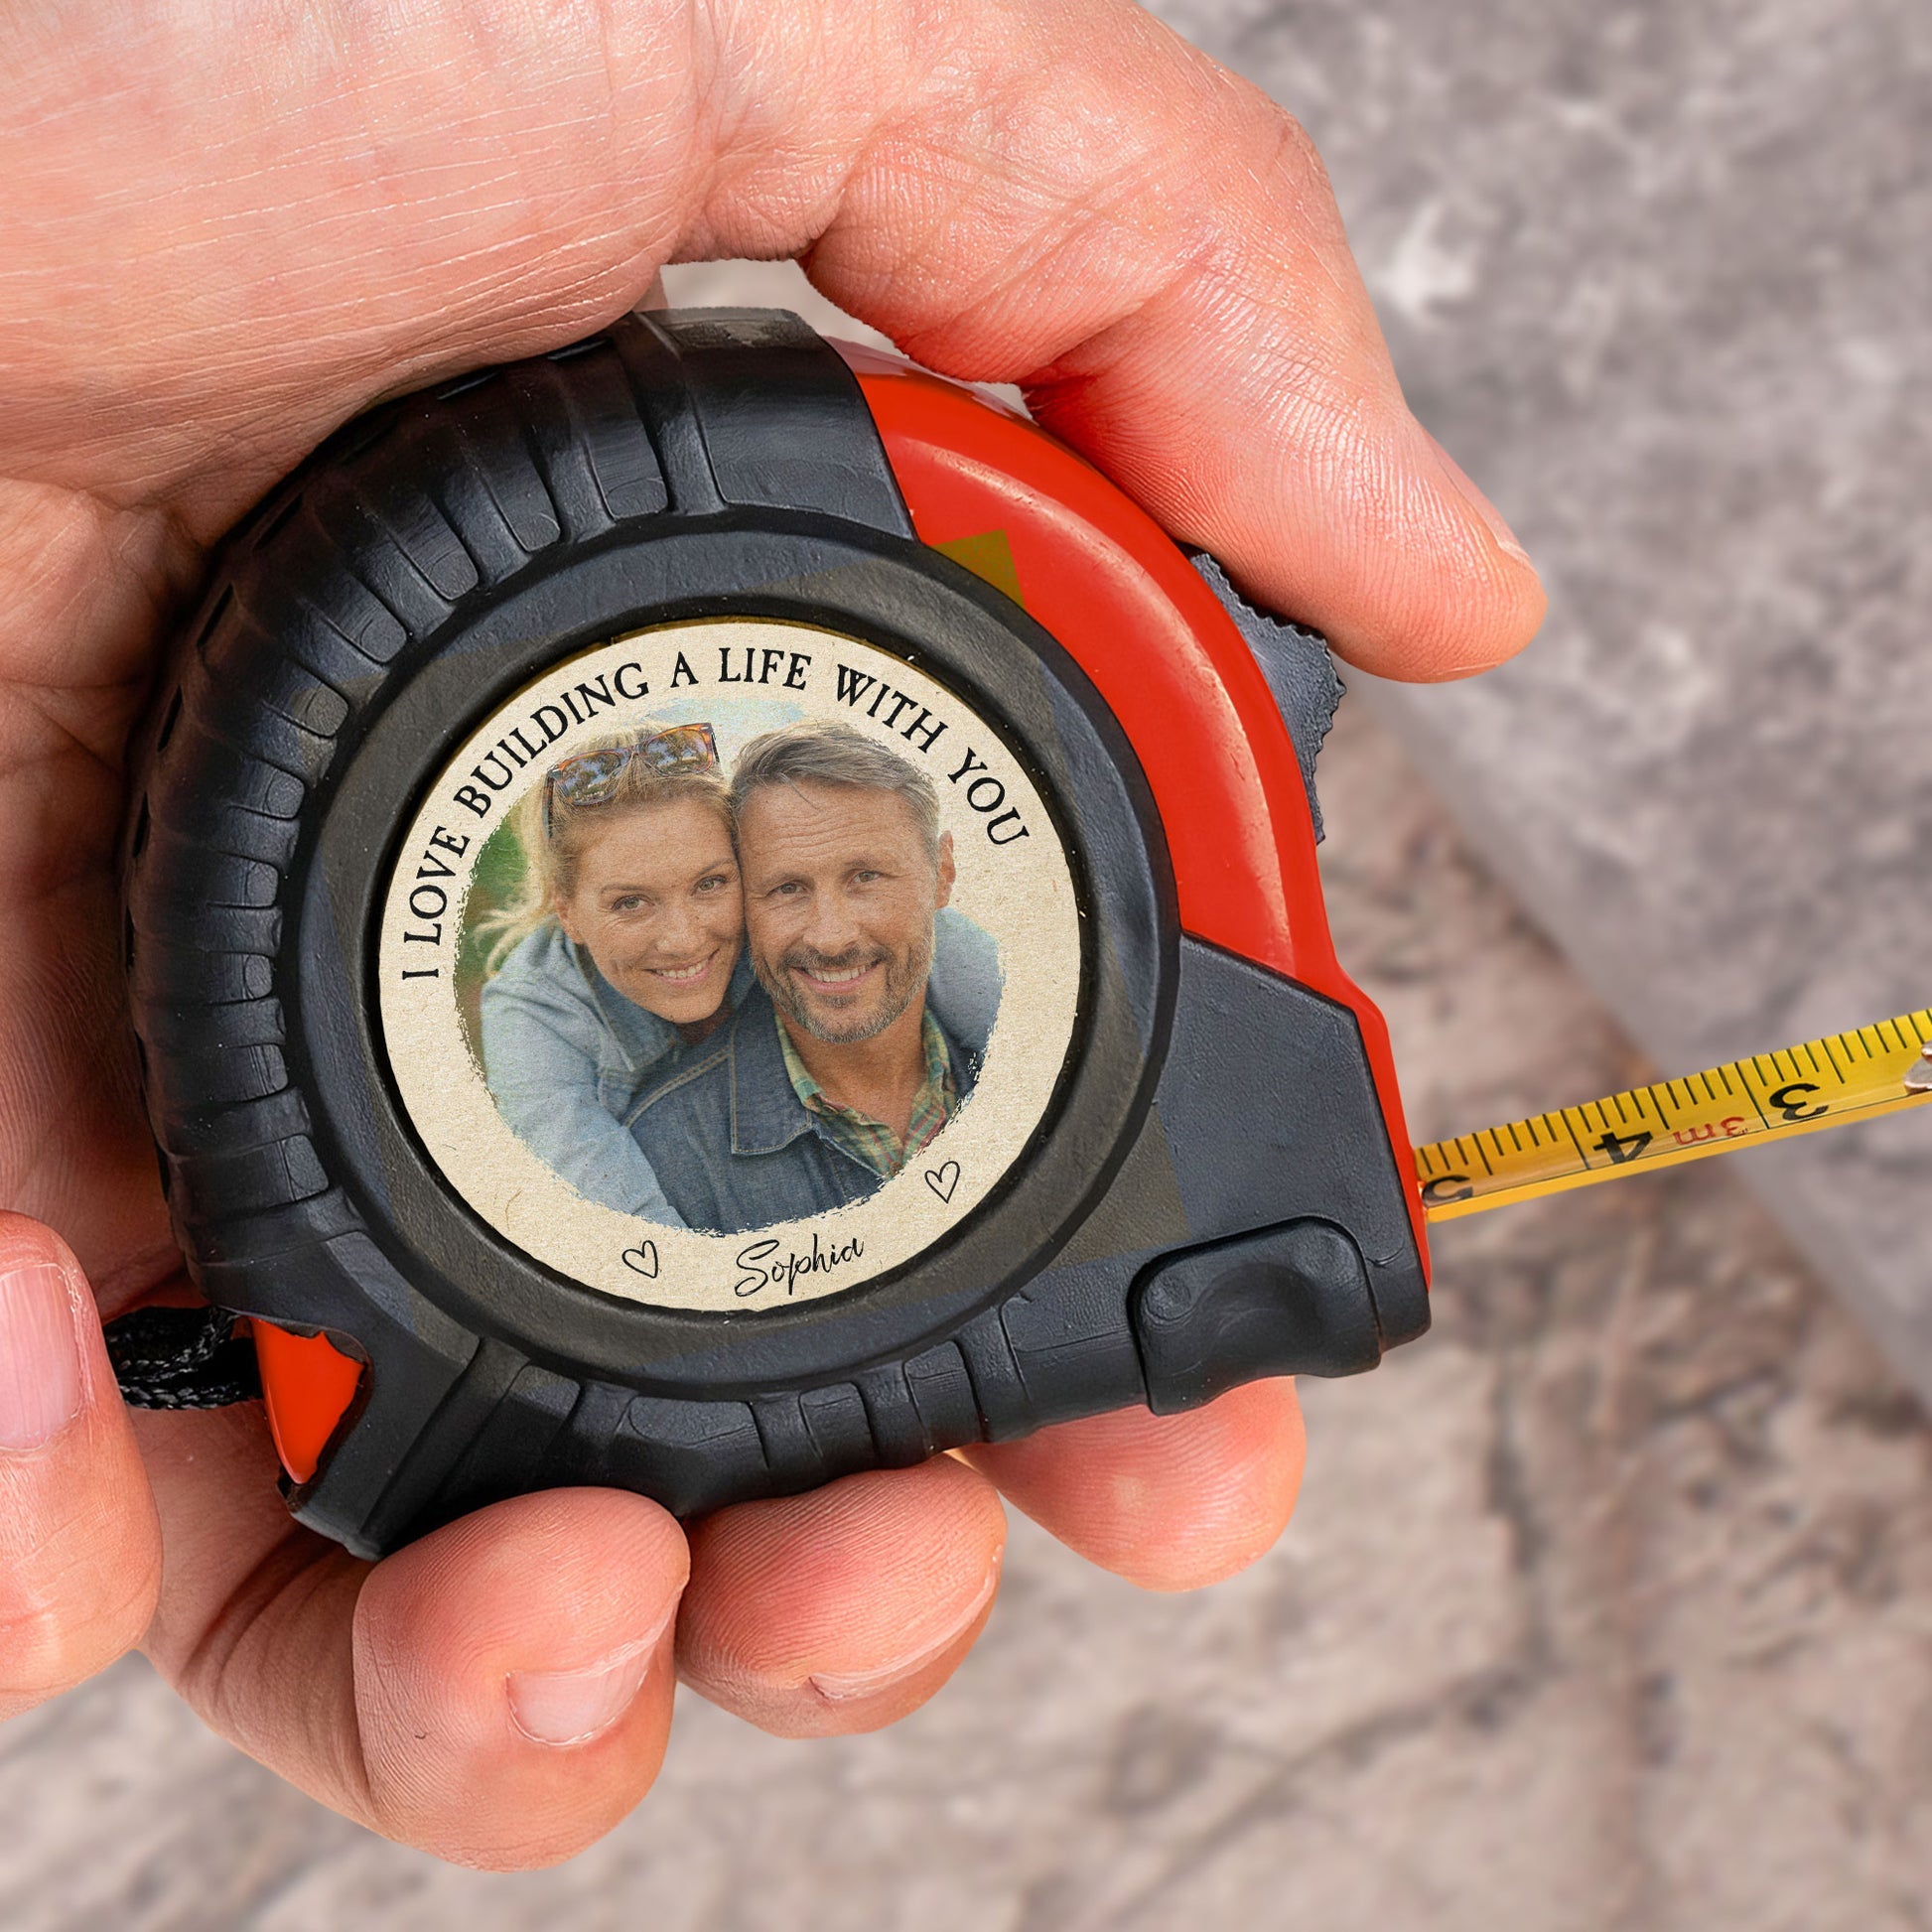 I Love Building A Life With You - Personalized Photo Tape Measure